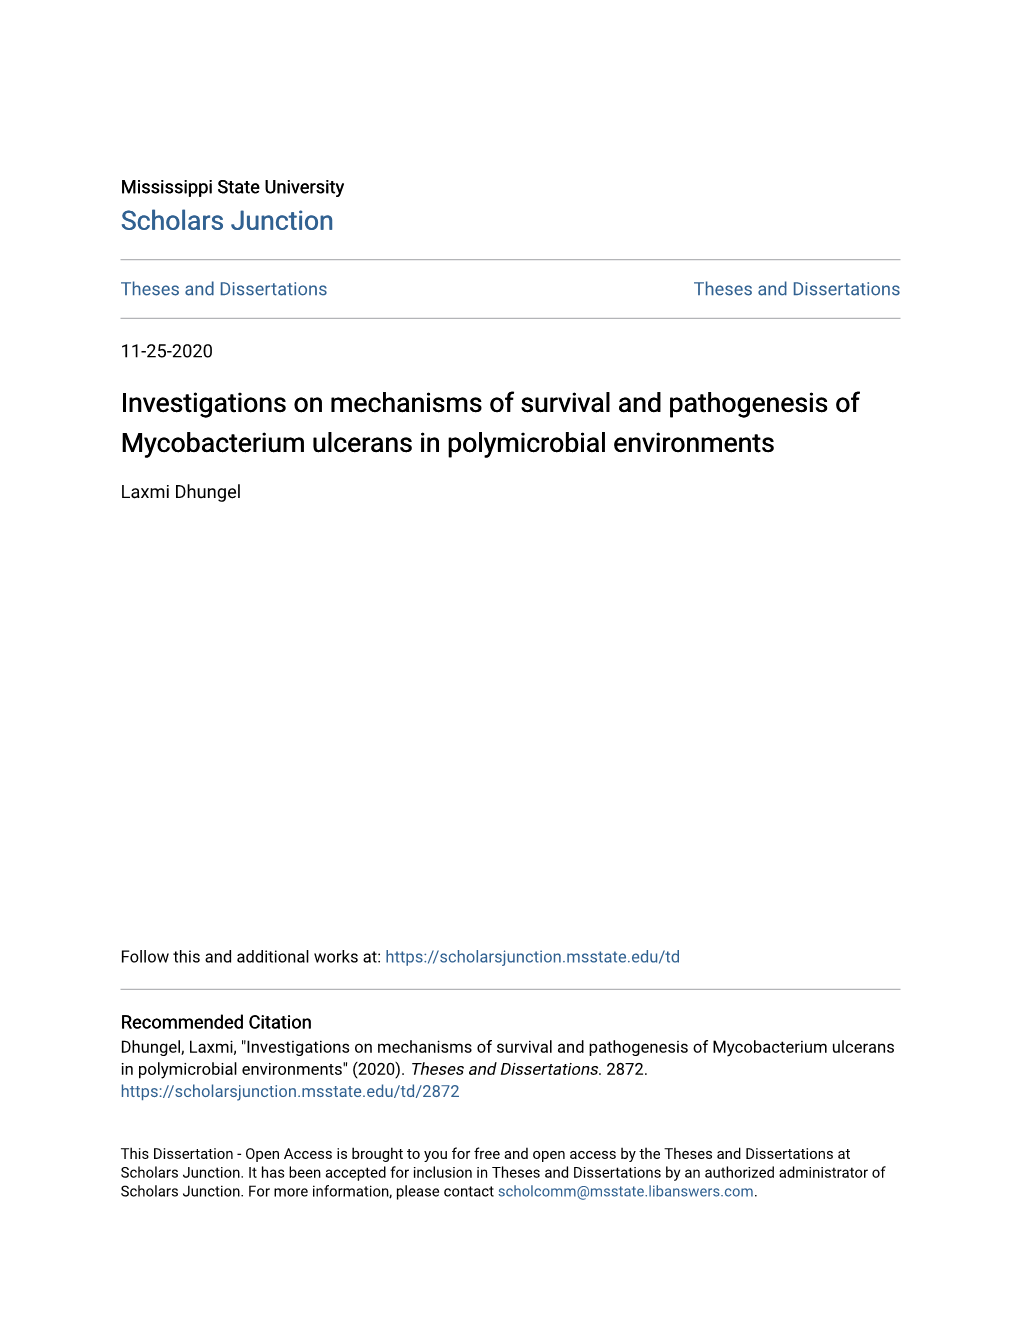 Investigations on Mechanisms of Survival and Pathogenesis of Mycobacterium Ulcerans in Polymicrobial Environments